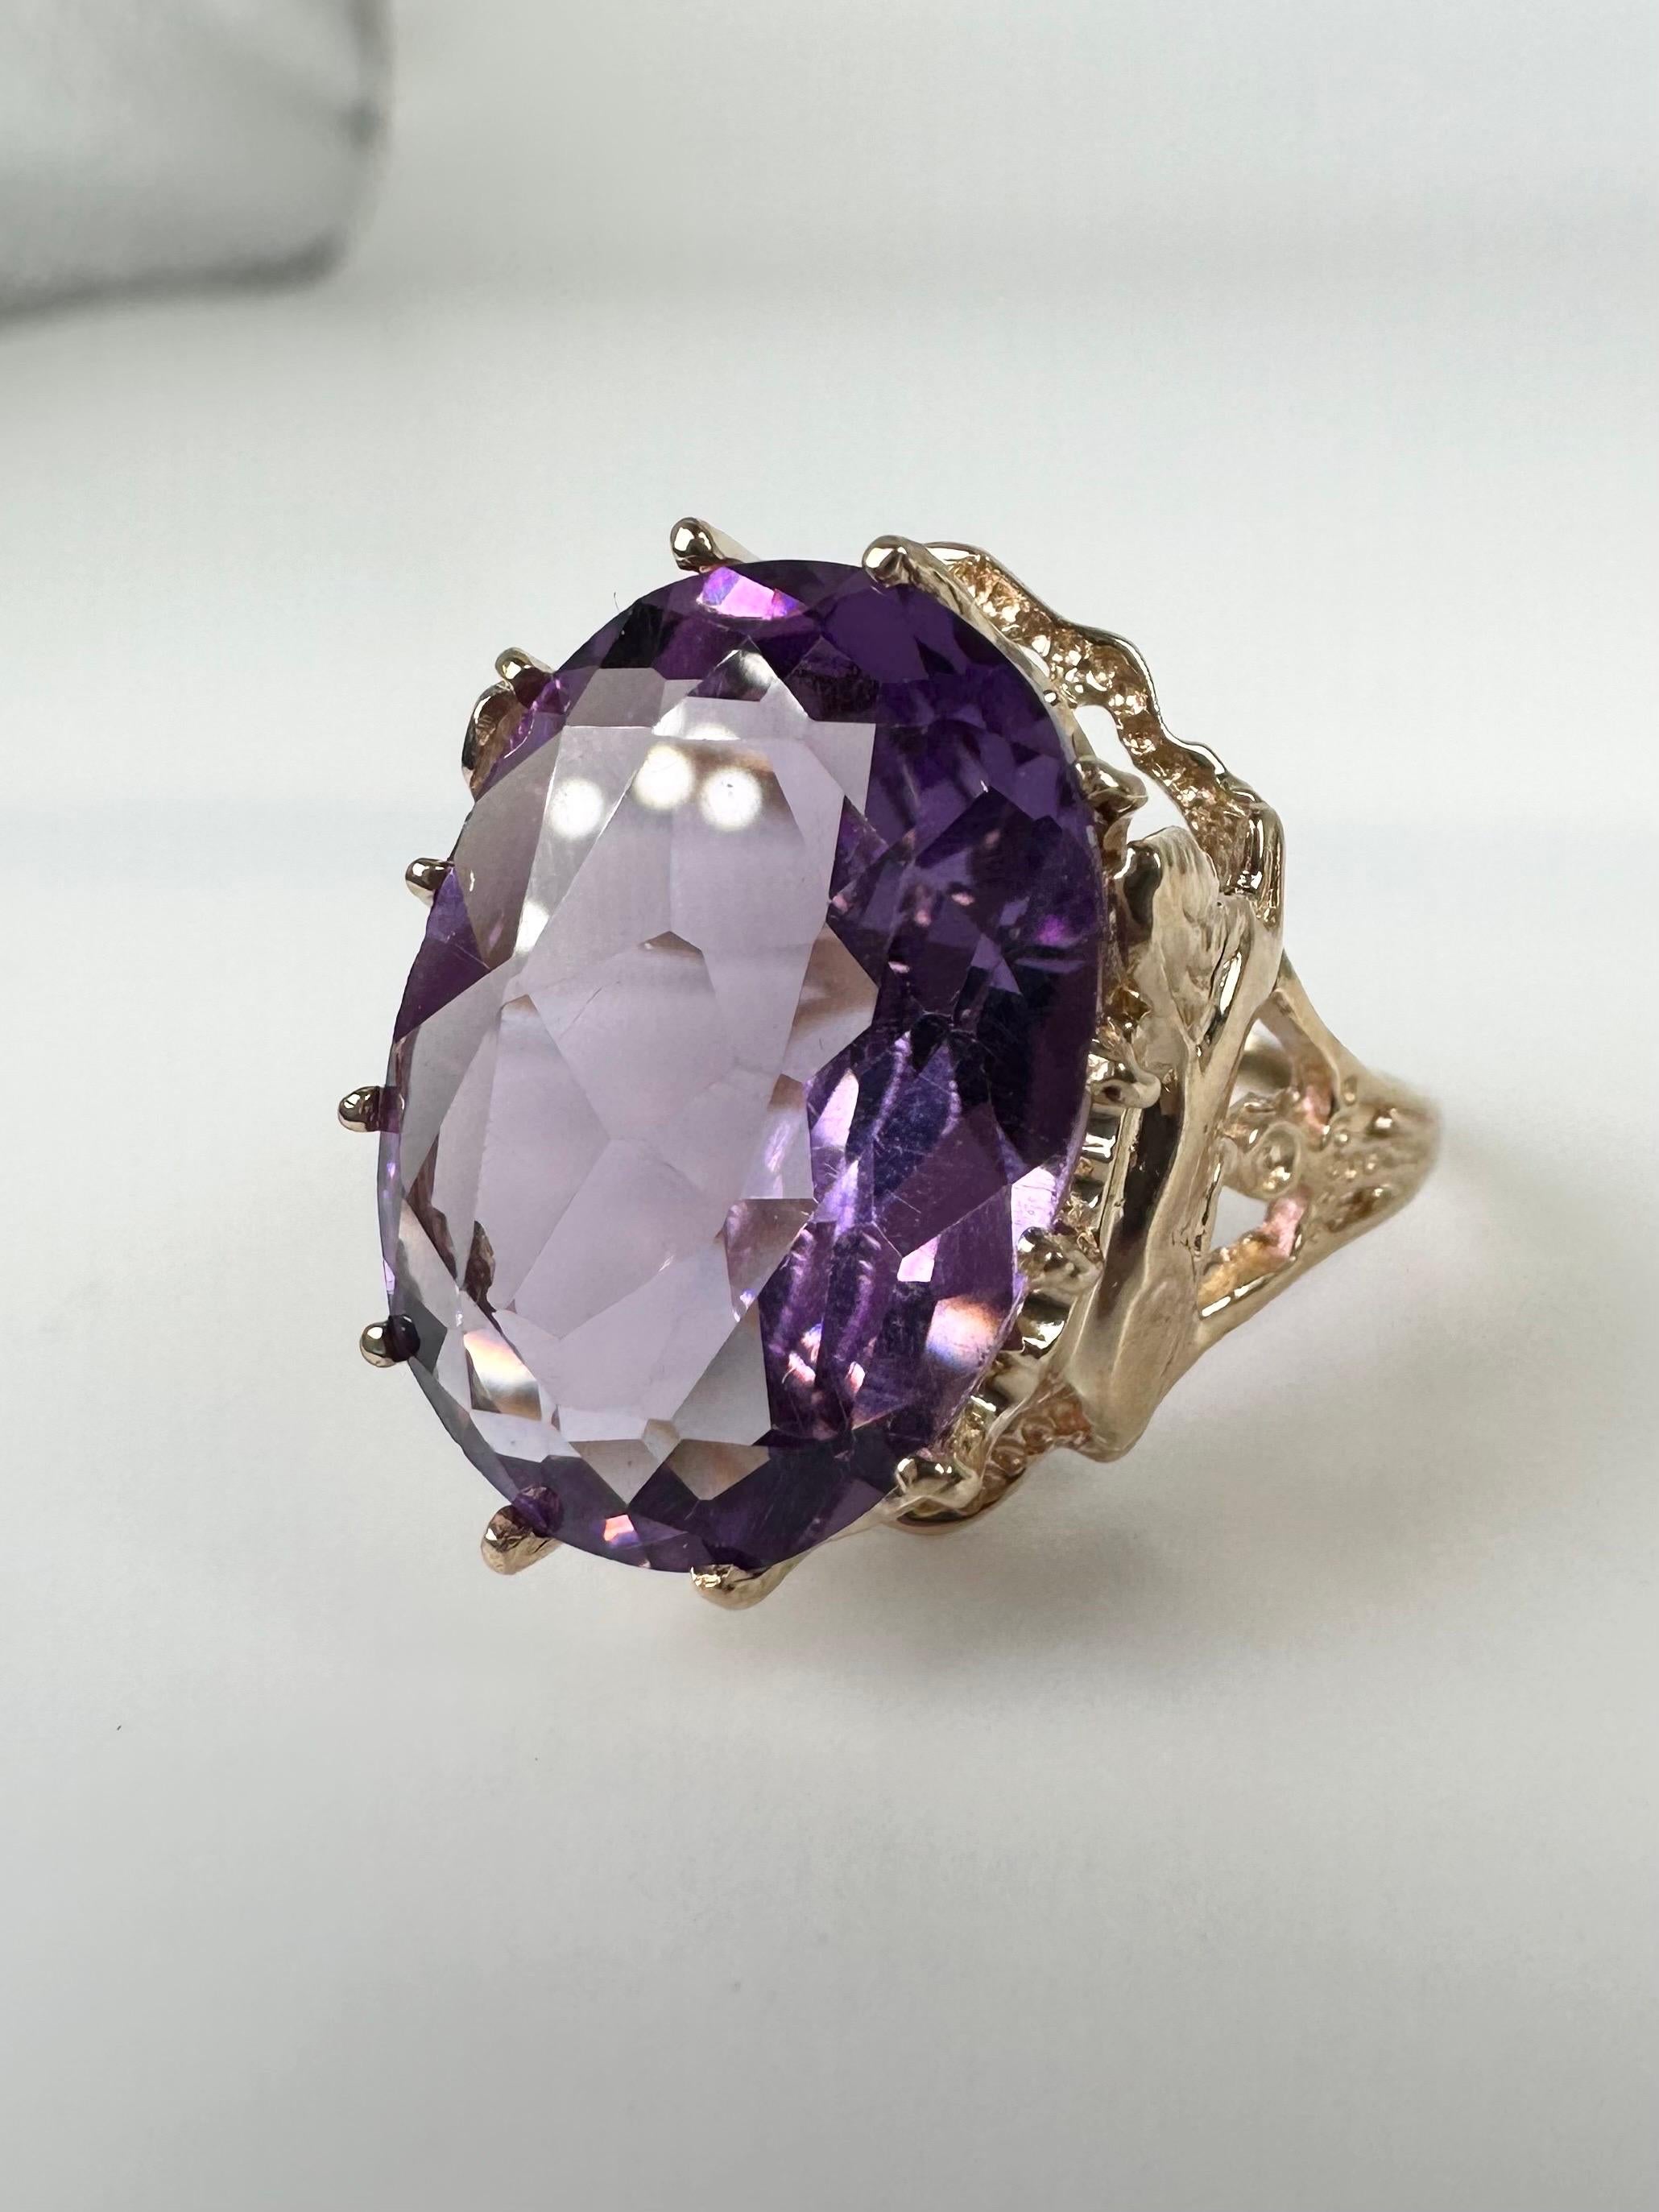 Vintage amethyst cocktail ring in 14KT yellow gold, artistically finished with one of the most brightest color amethyst. Very bright ring for a night out or a gala dinner.

GOLD: 14KT gold
NATURAL AMETHYST(S)
Clarity/Color: Slightly